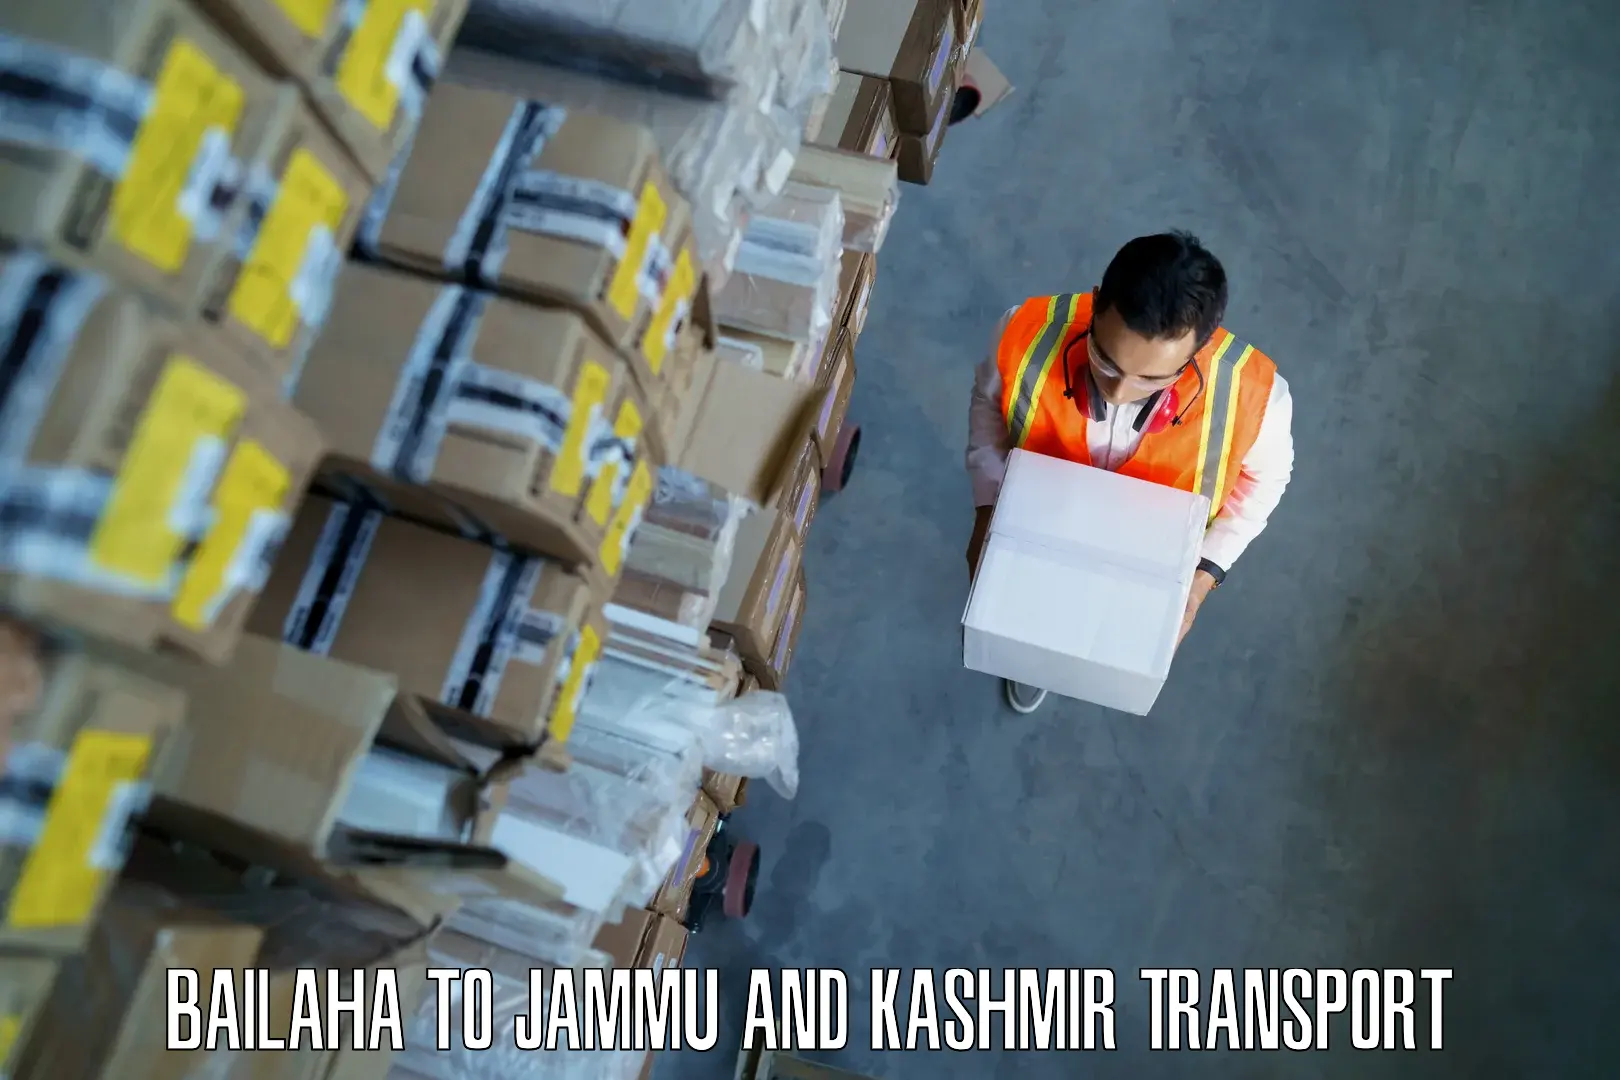 Transport bike from one state to another Bailaha to Jammu and Kashmir